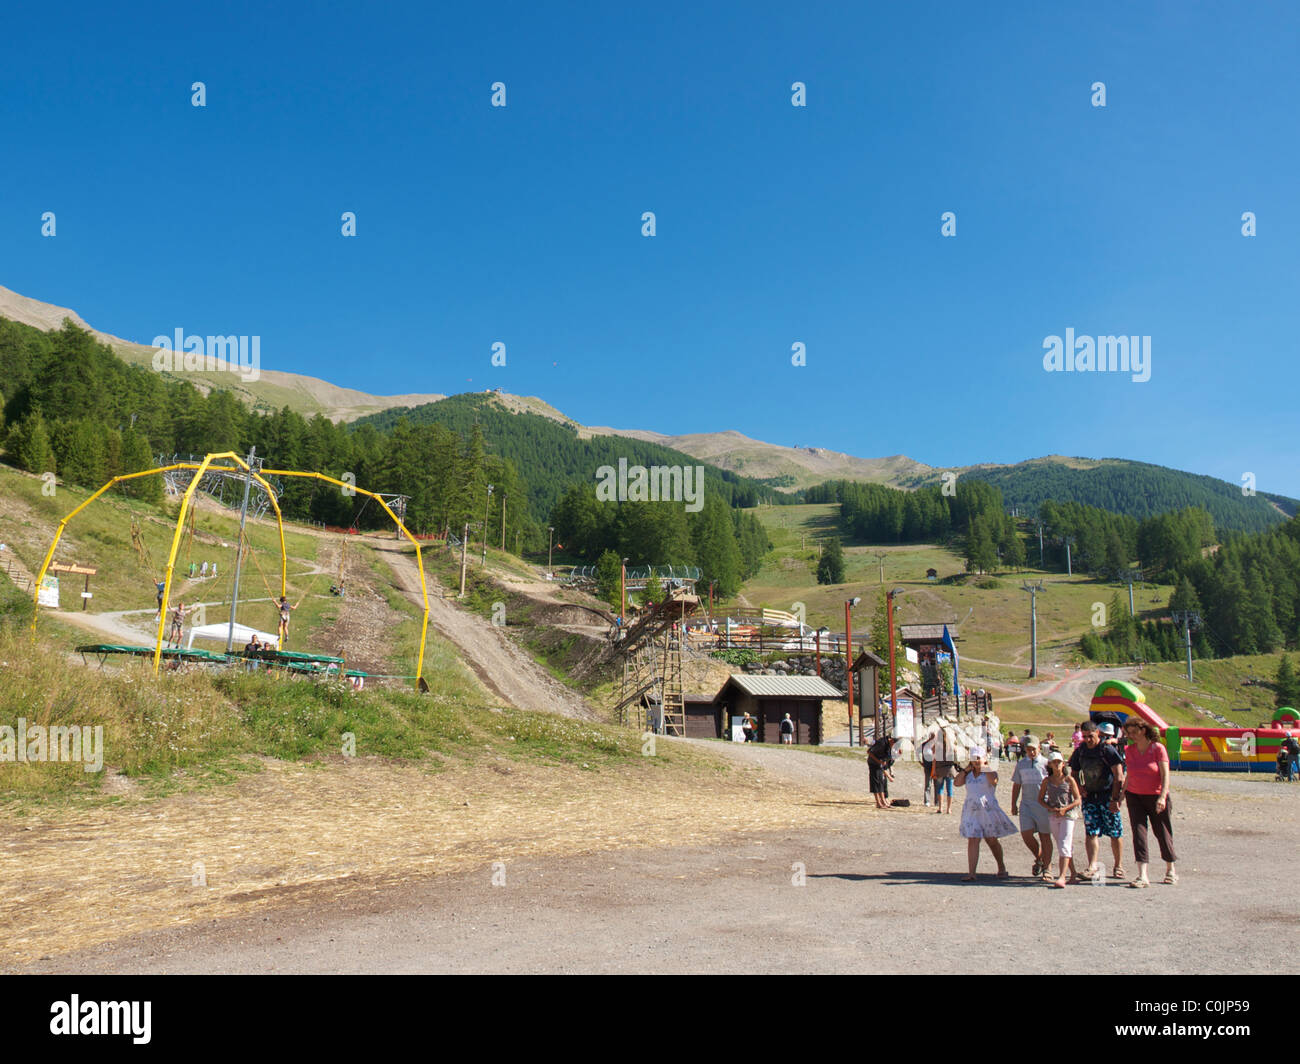 Summer fun in Les Orres, French Alps, France Stock Photo